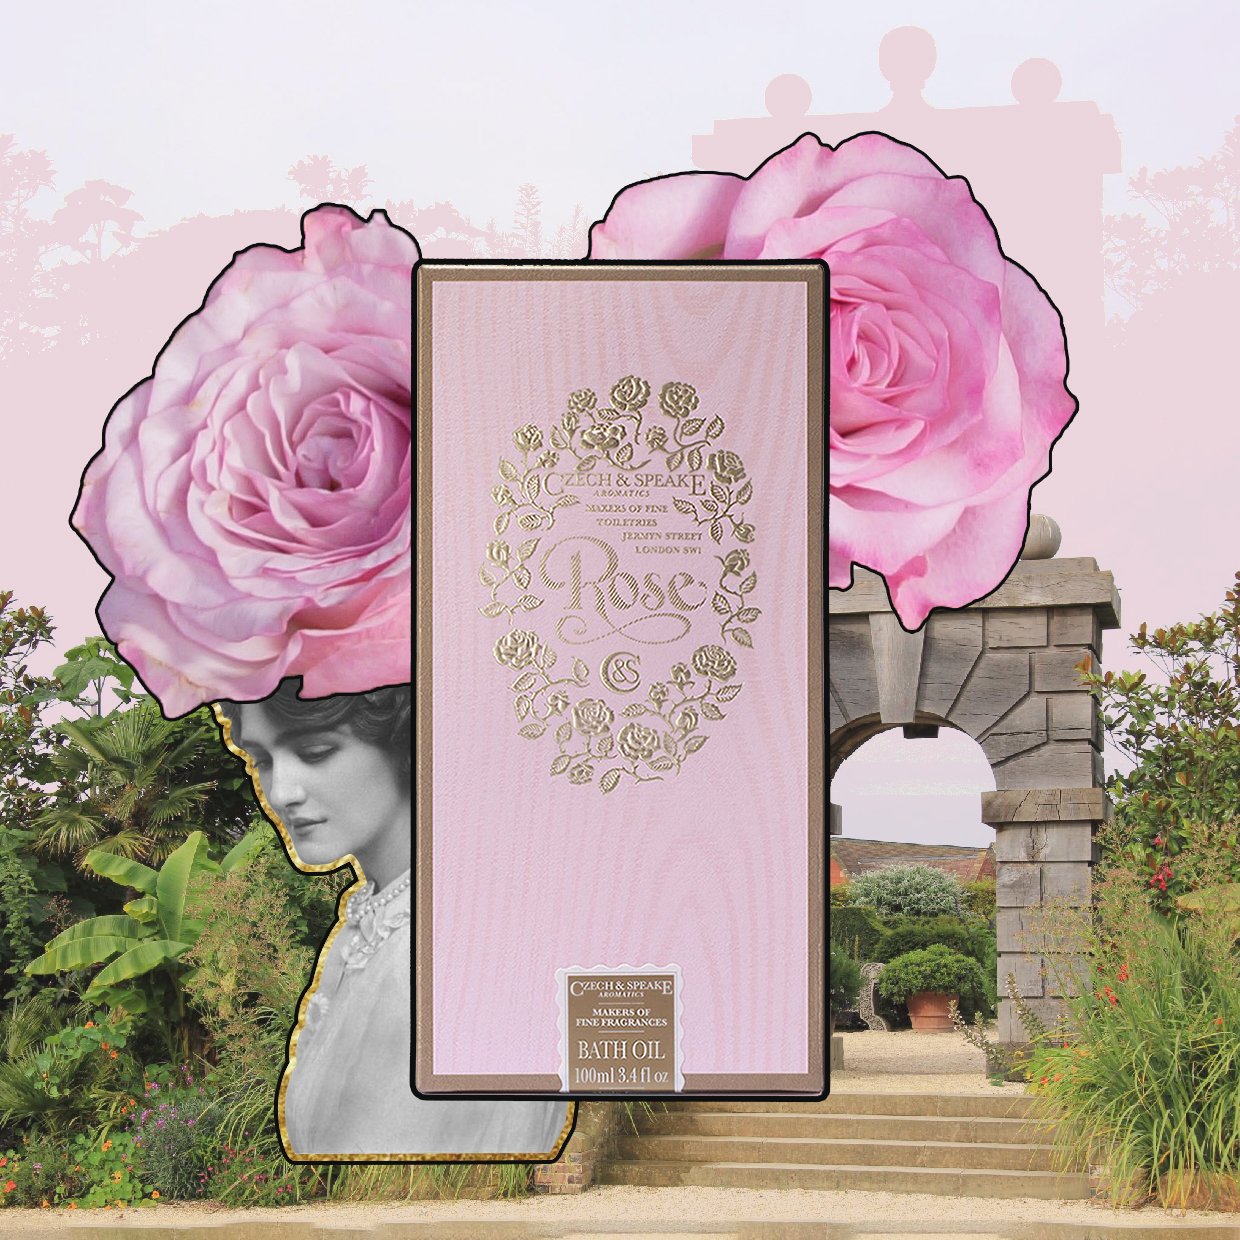 Collage of Czech & Speake Rose packaging